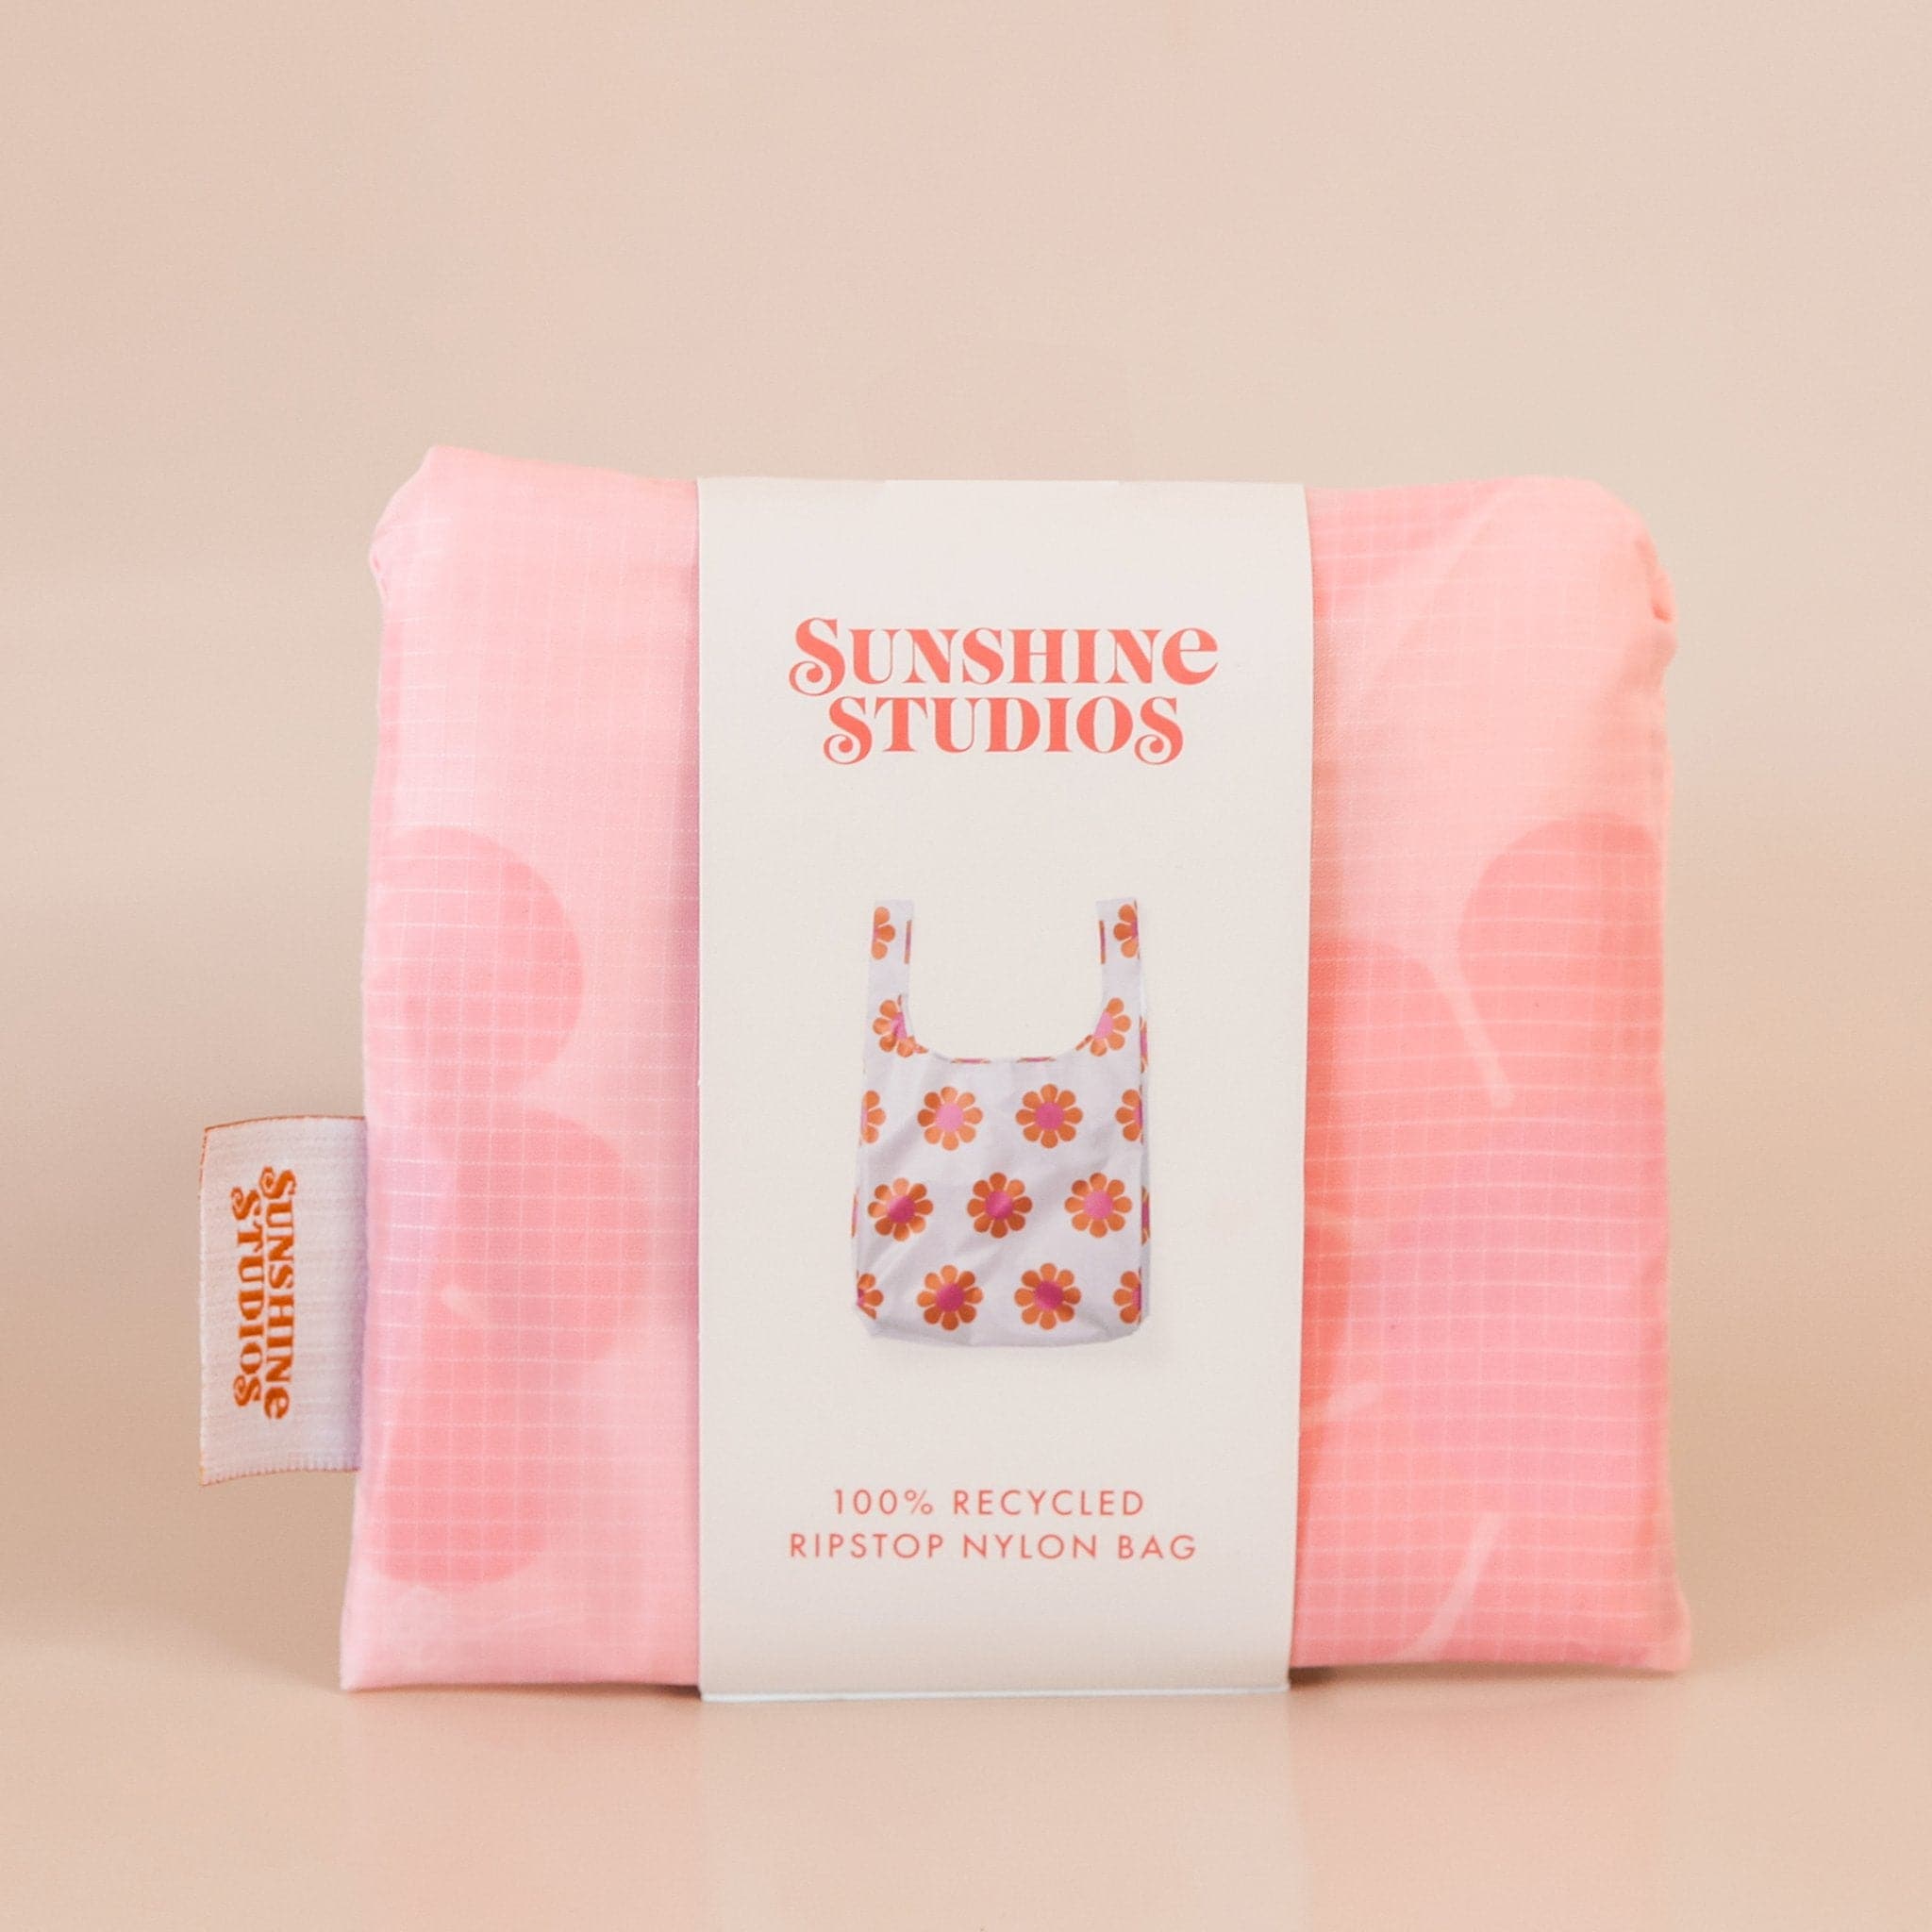 Soft pink reusable bag folded tightly into a square. The bag is wrapped in a white band that reads ’sunshine studios'. Under the text is a picture of the reusable bag. On the left side of the bag is a white tag with bright orange text that reads ’sunshine studios.'